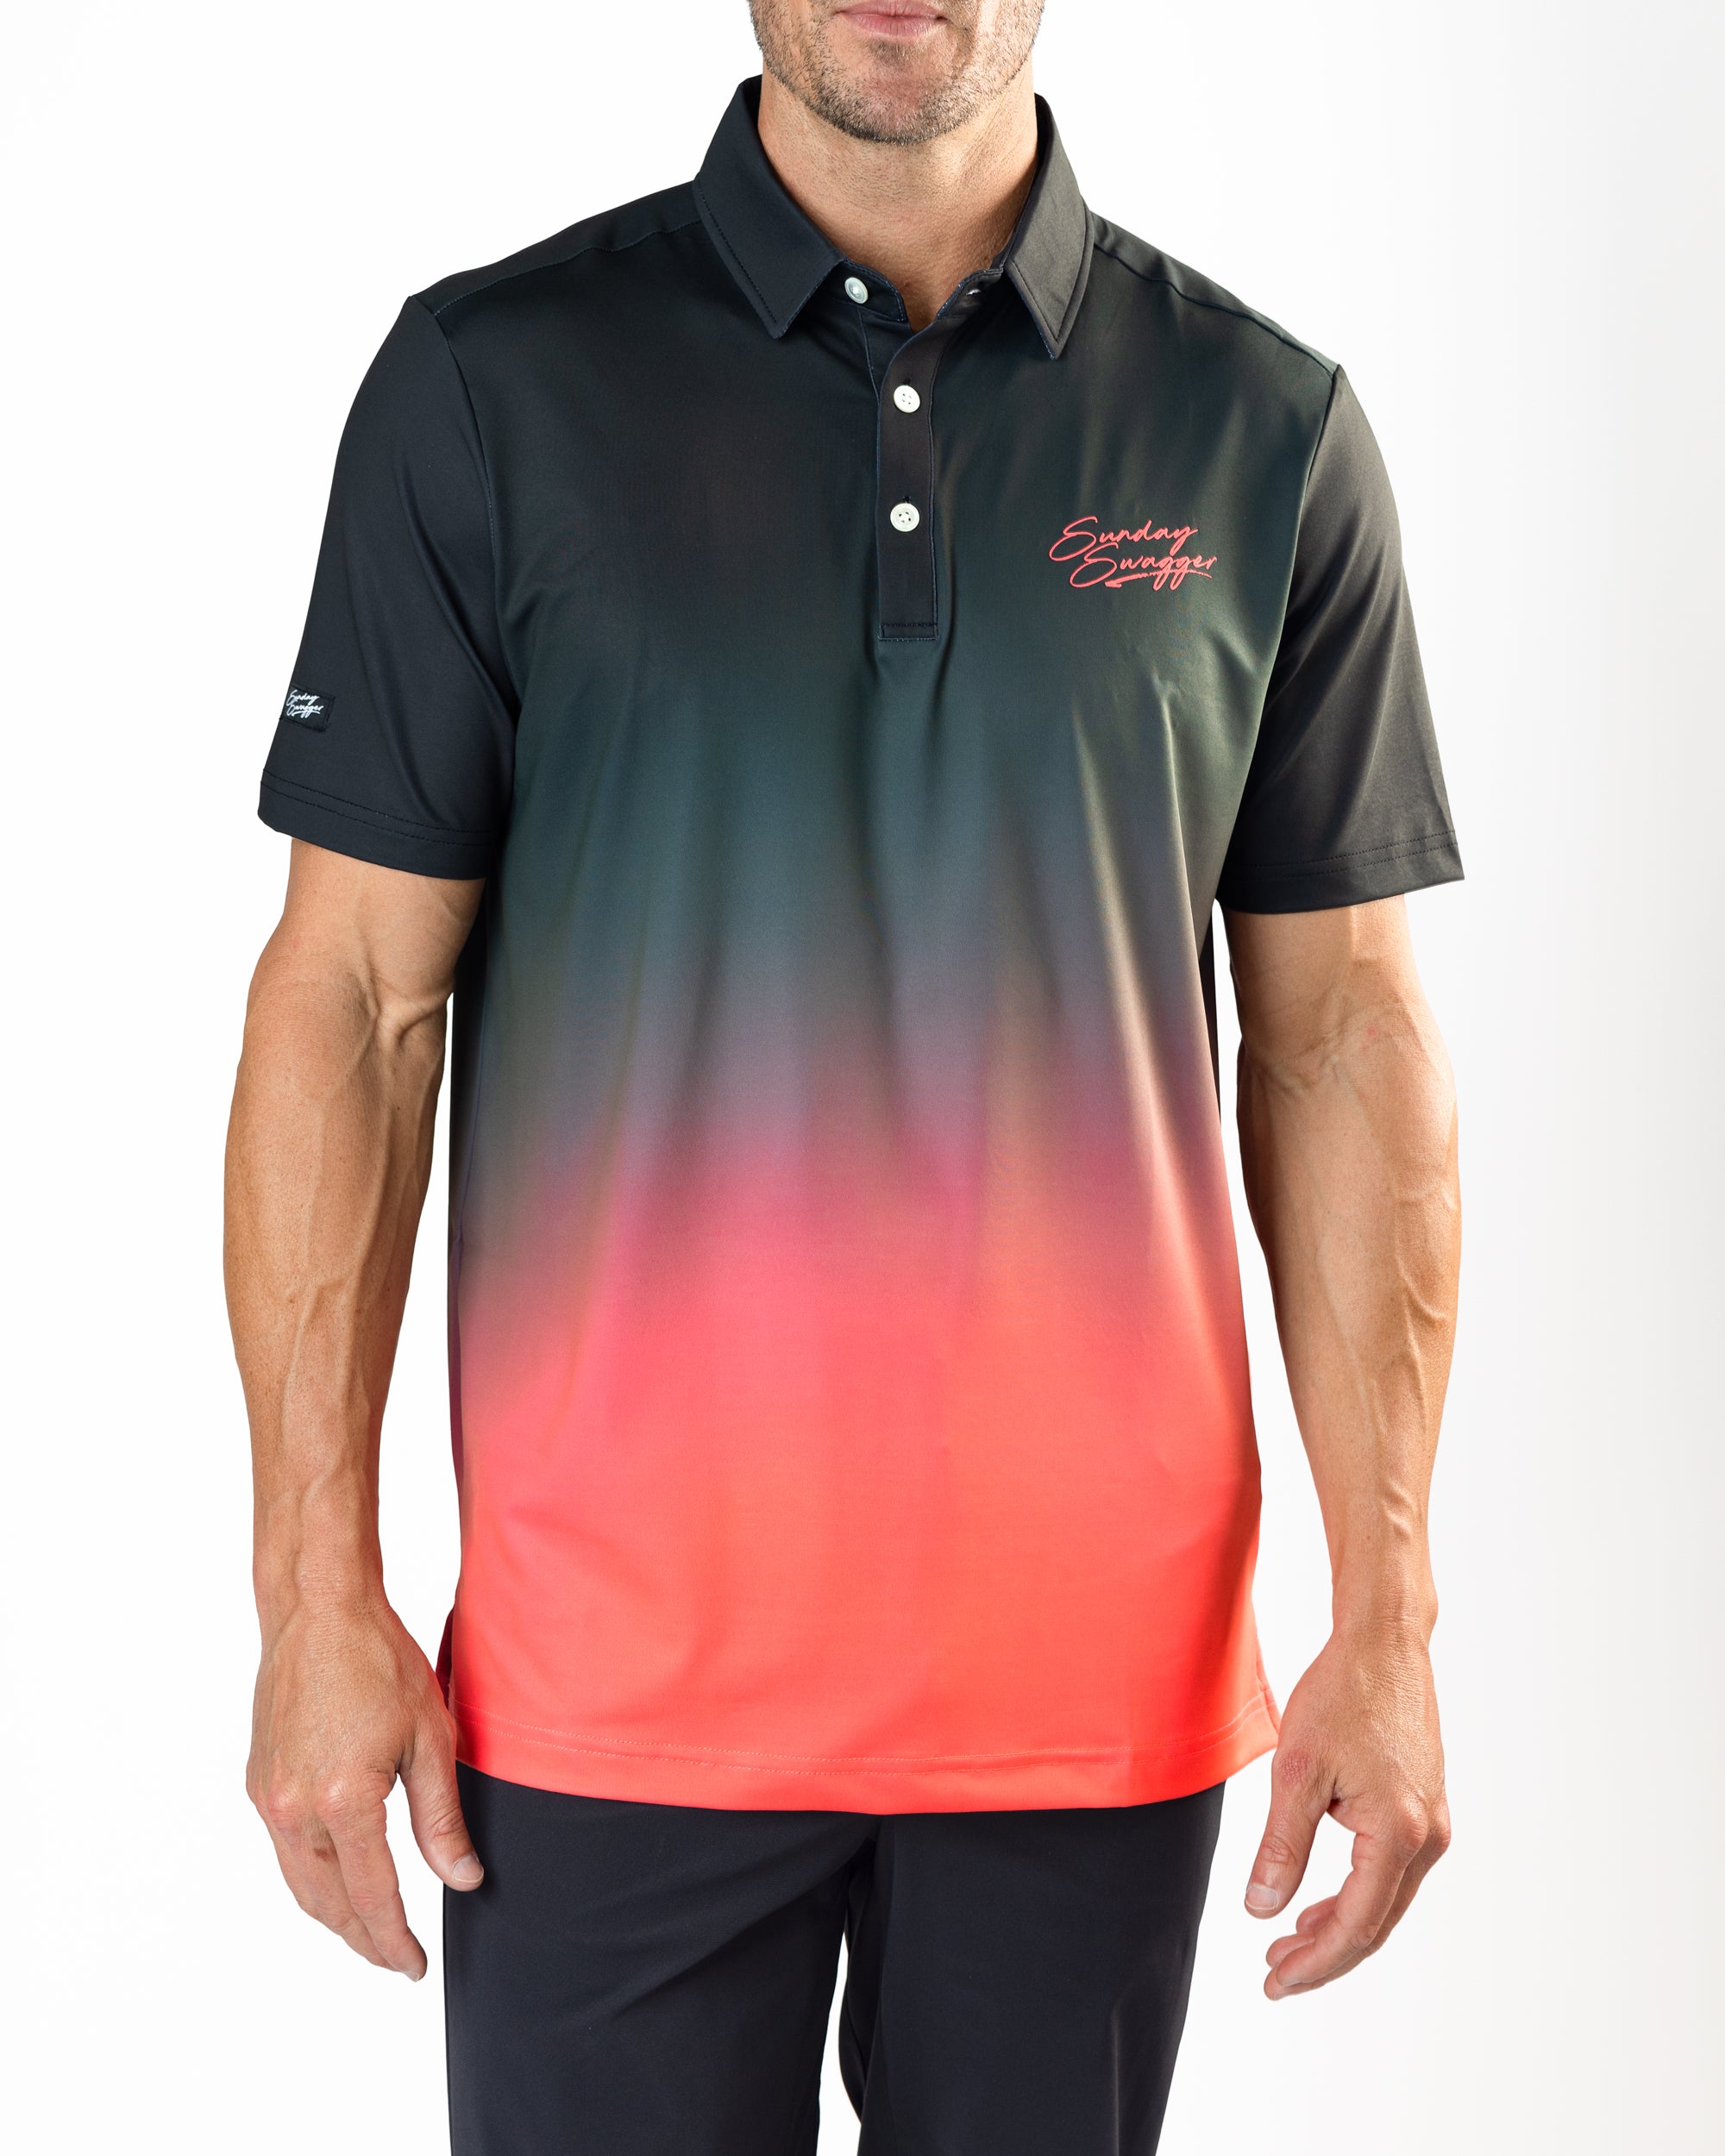 Phantom black and red gradient golf polo | Sunday Swagger mens golf polo